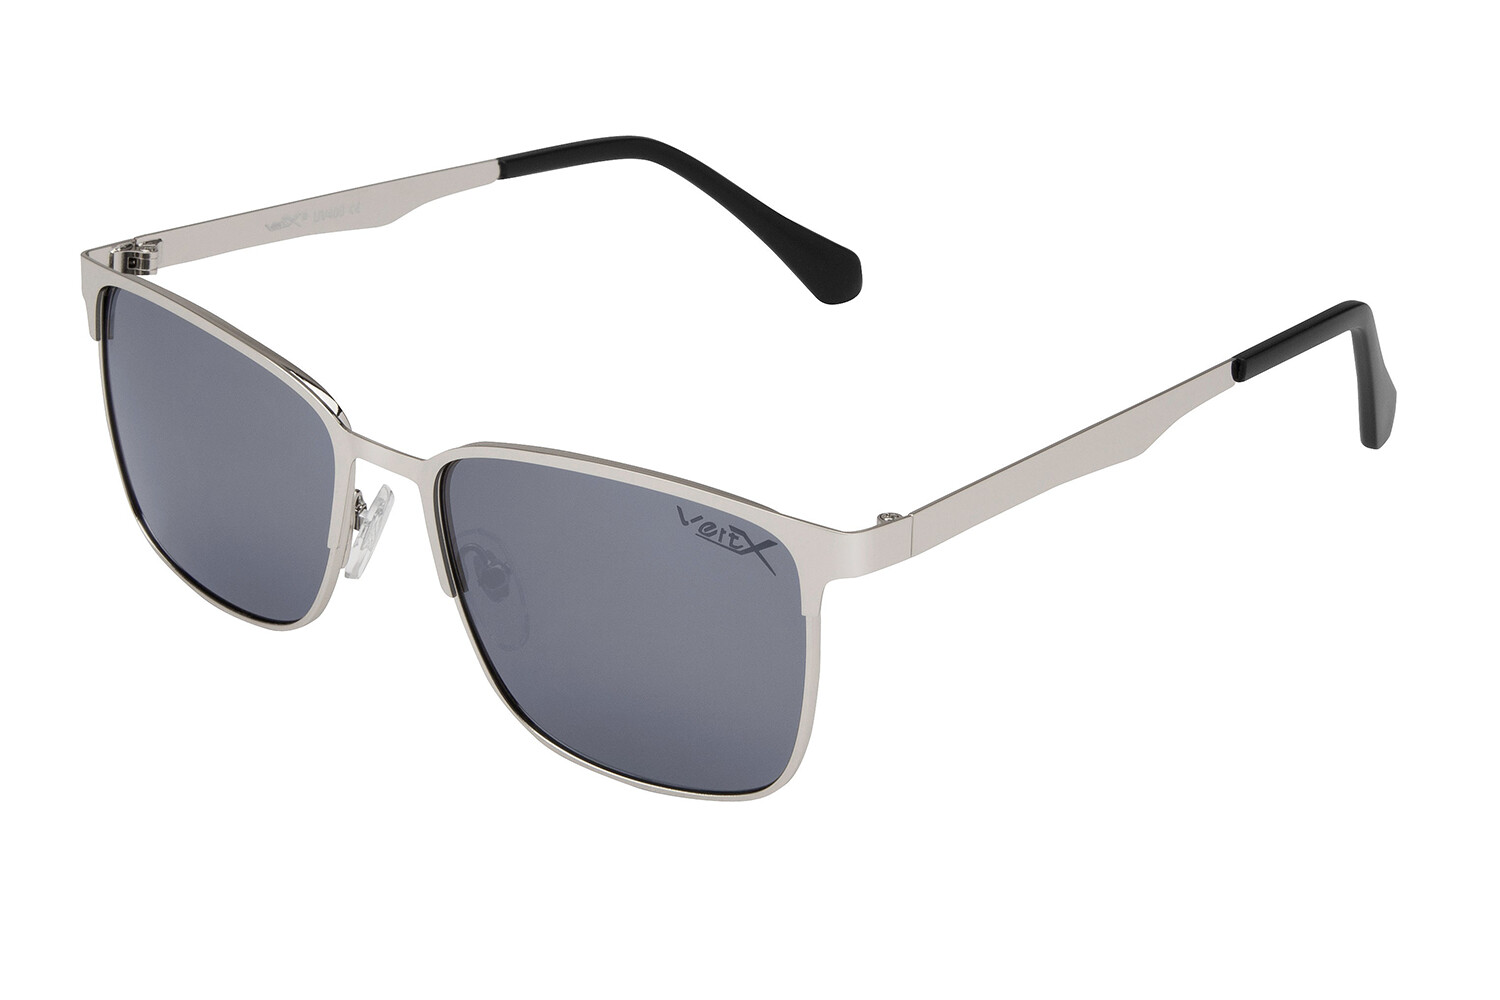 Men's Metal Sport Sunglasses (Less than $10 in the store)